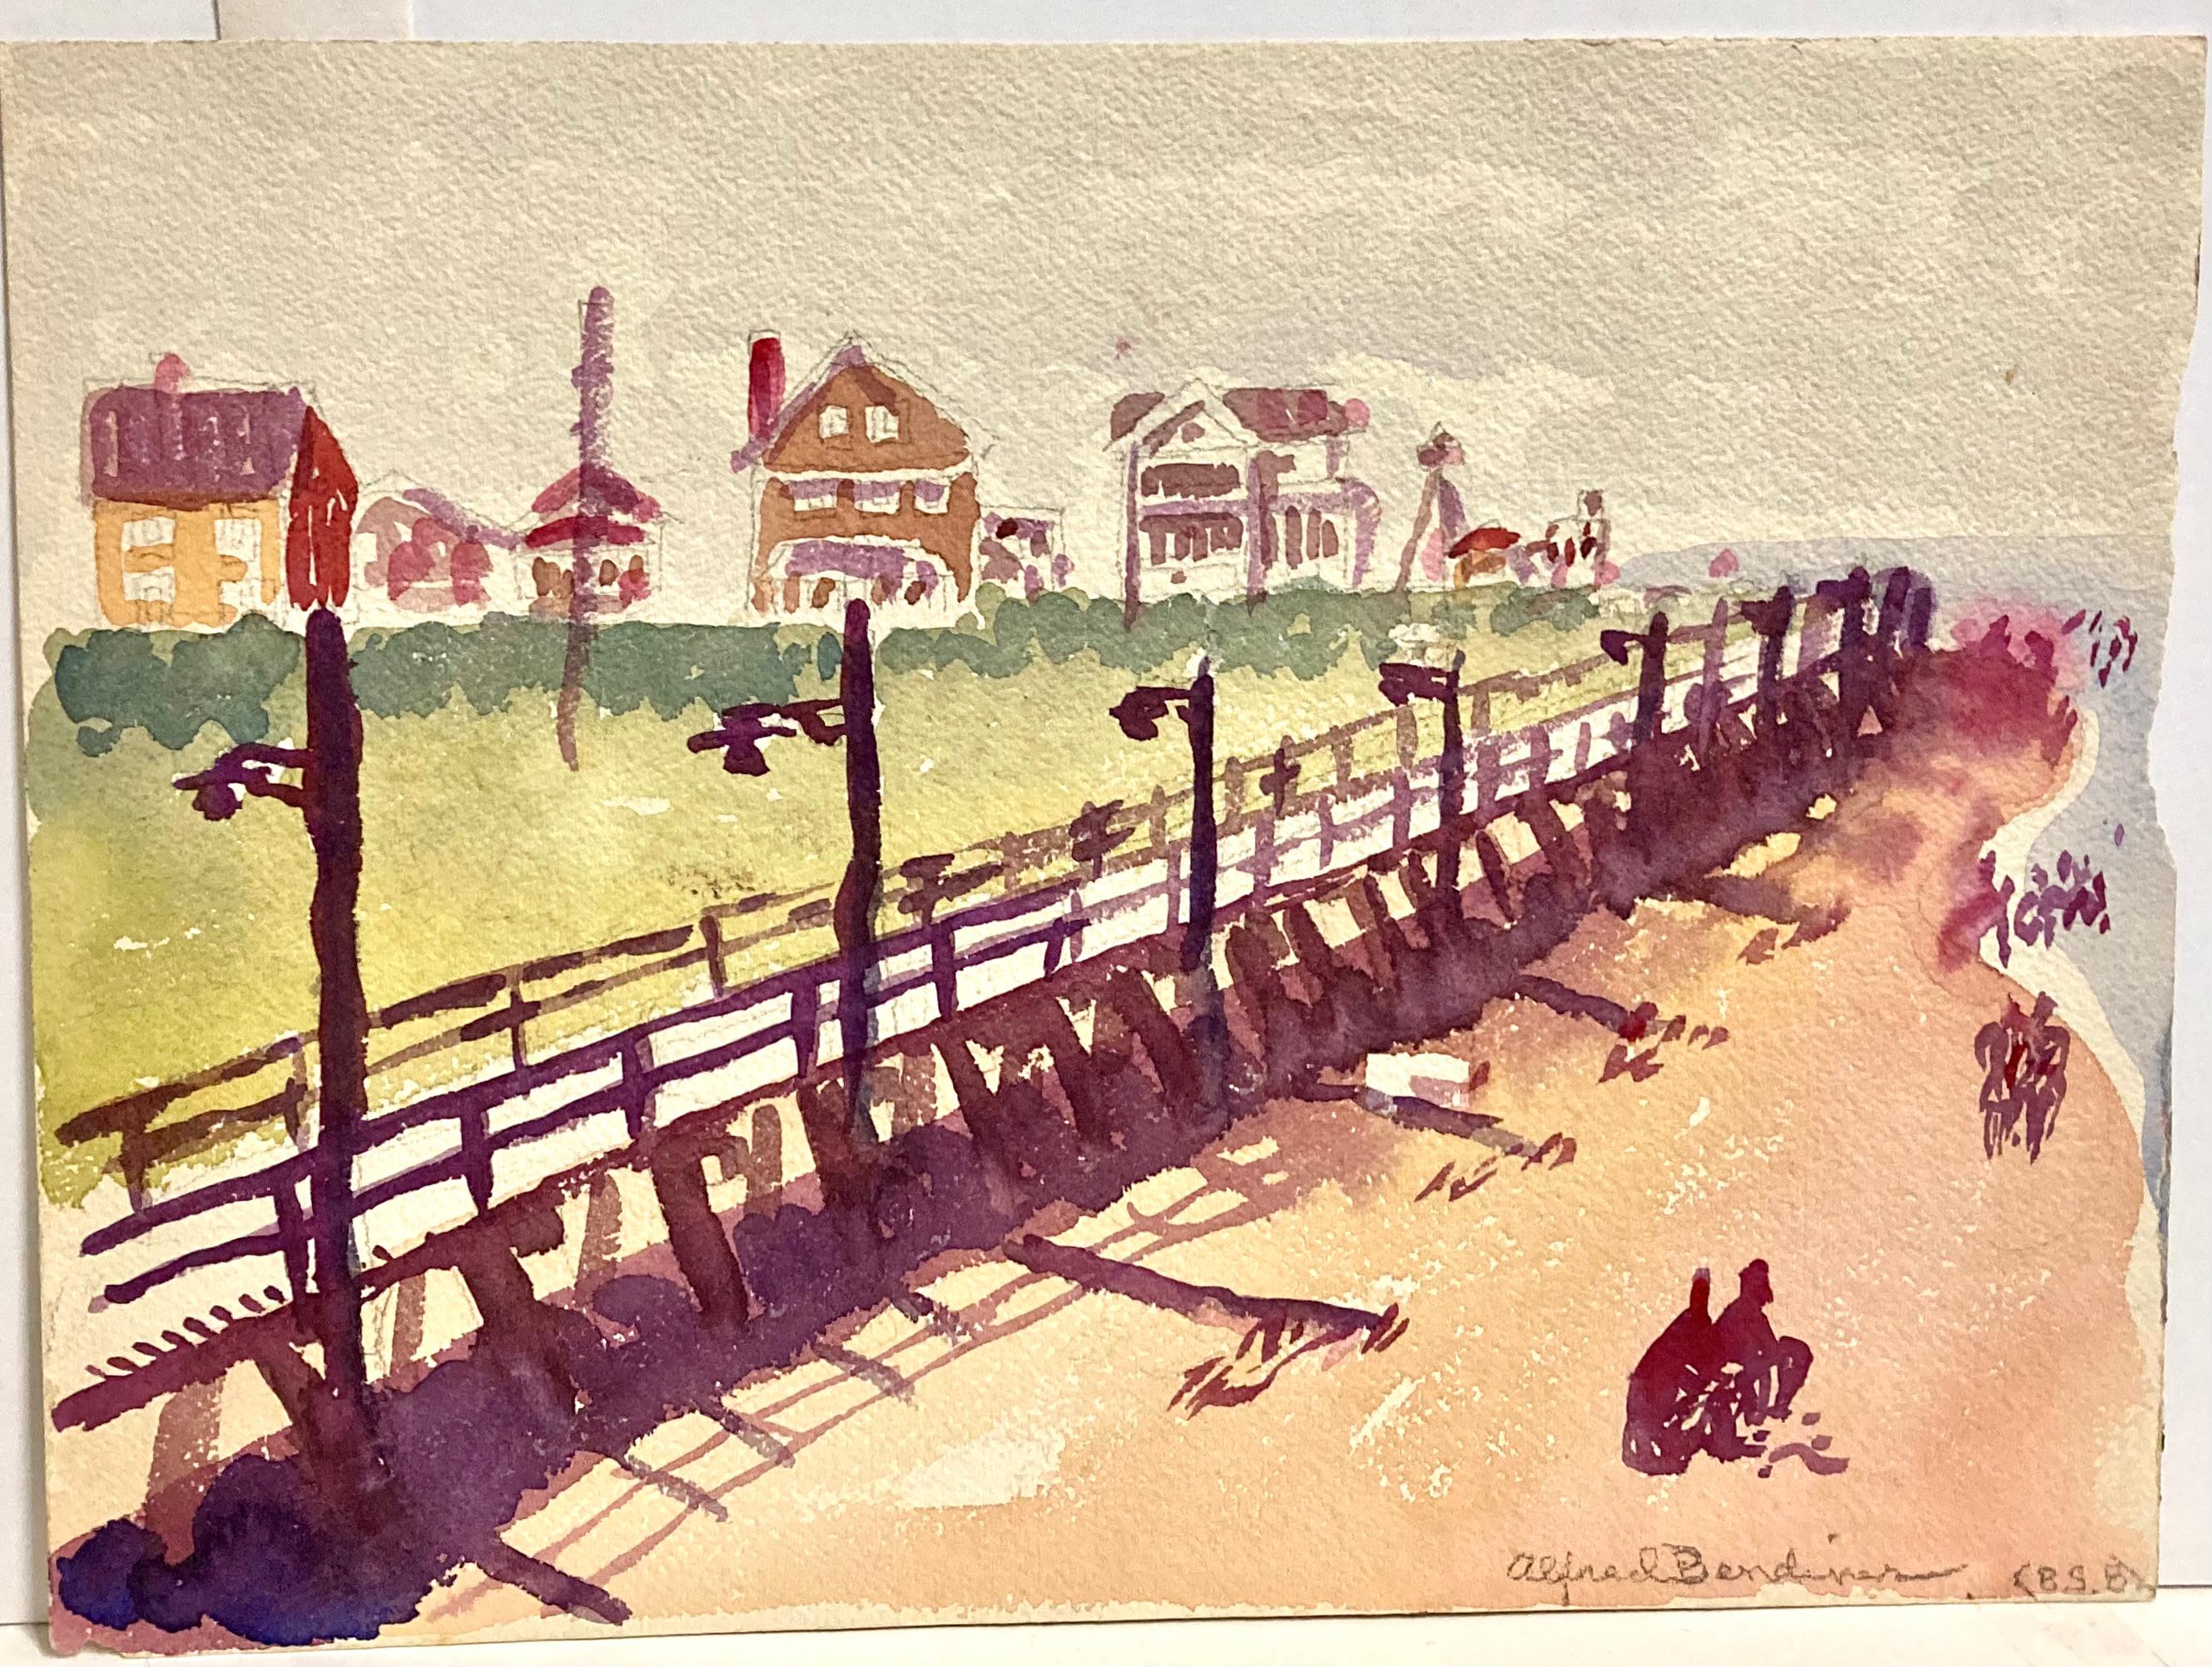 Apparently Bendiner never went a day without drawing. He was amazing! From Bendiner's Philadelphia the New Jersey beaches were an easy drive. Avalon is still a charming seaside town. 

This watercolor is authenticated in pencil at the lower right